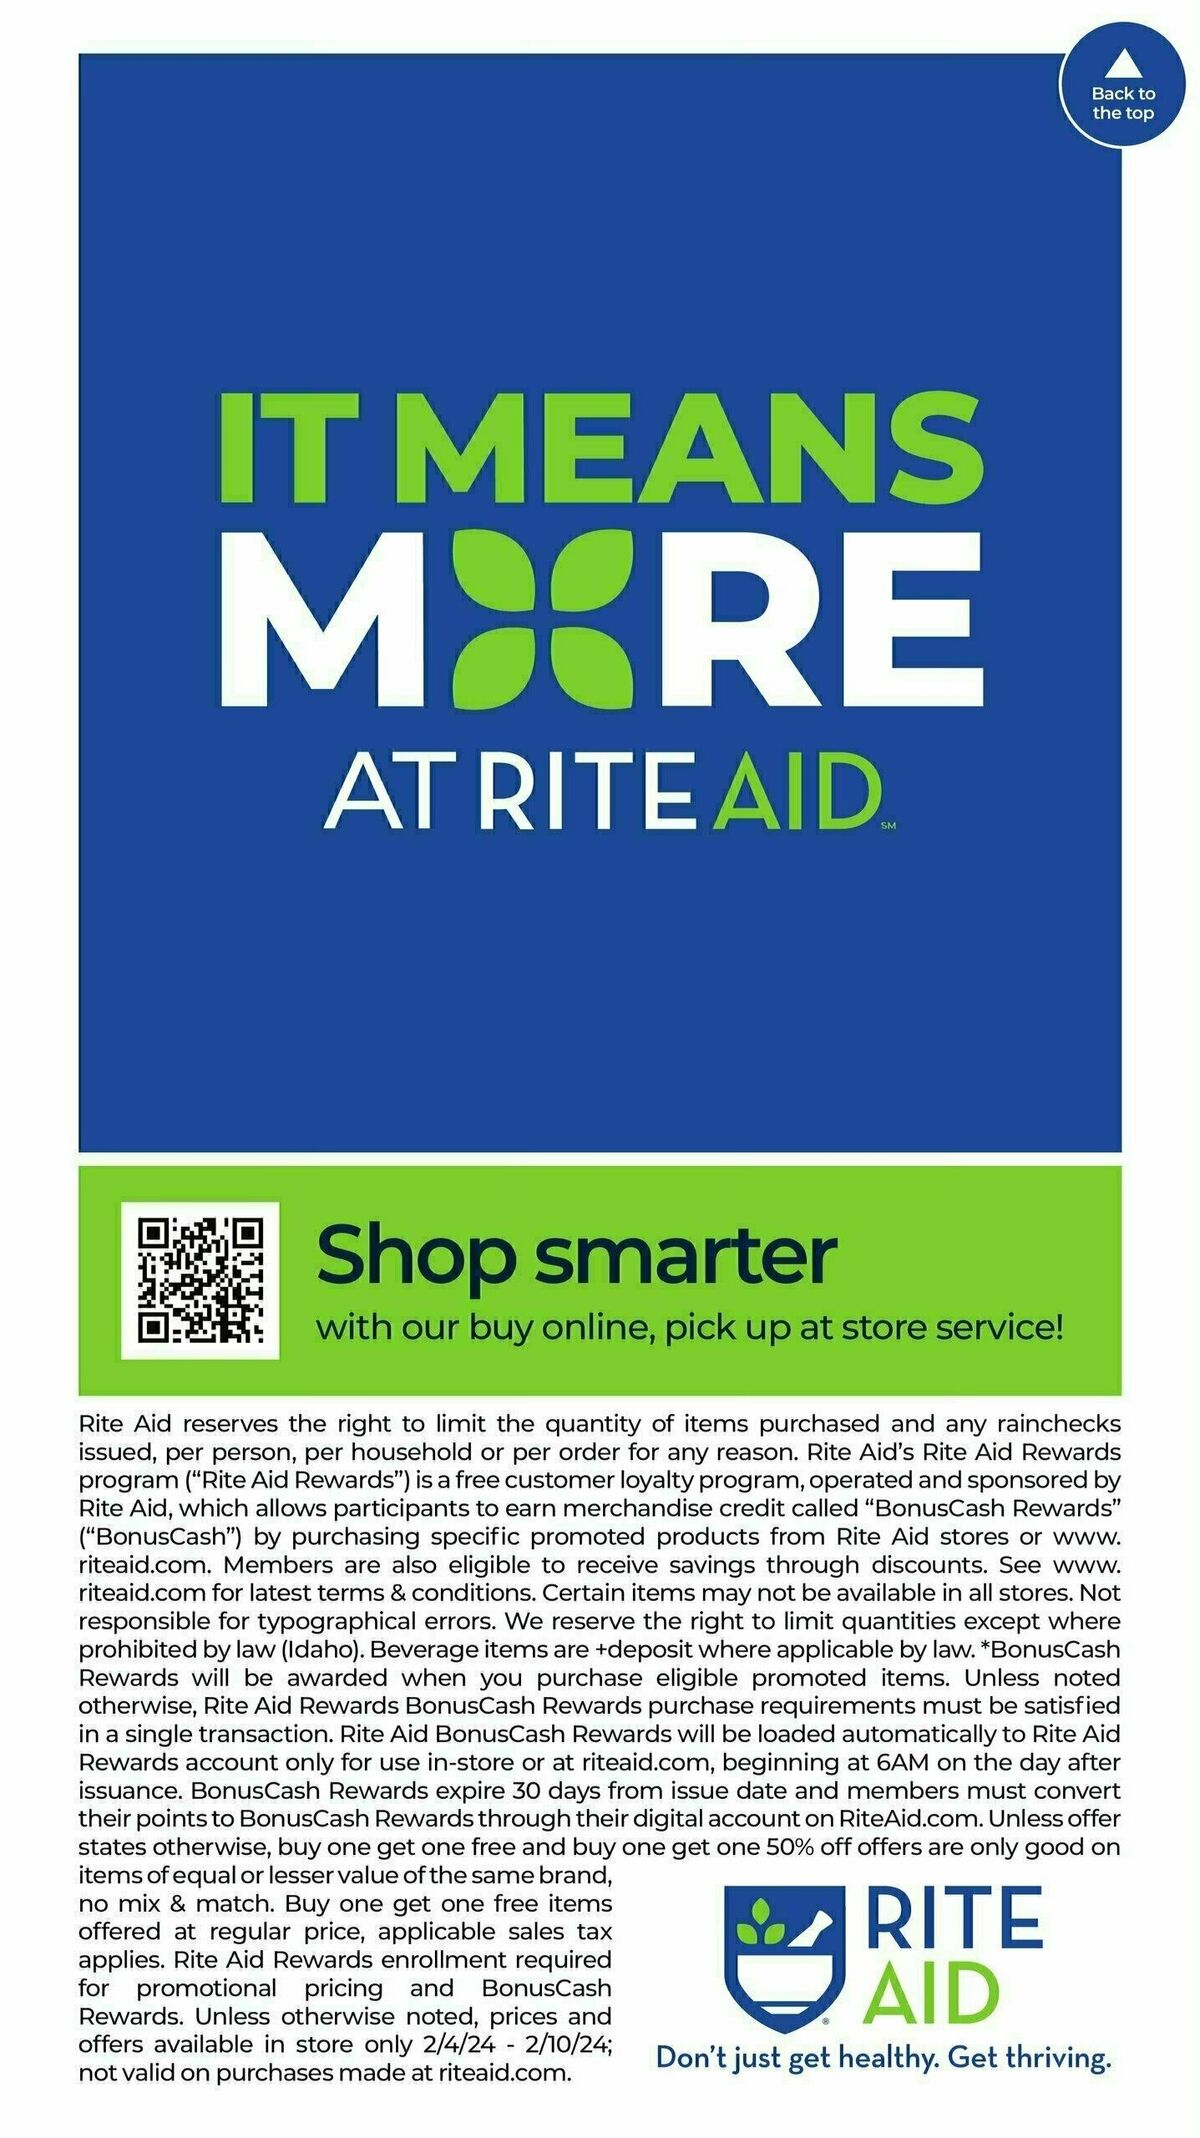 Rite Aid Weekly Ad from February 4